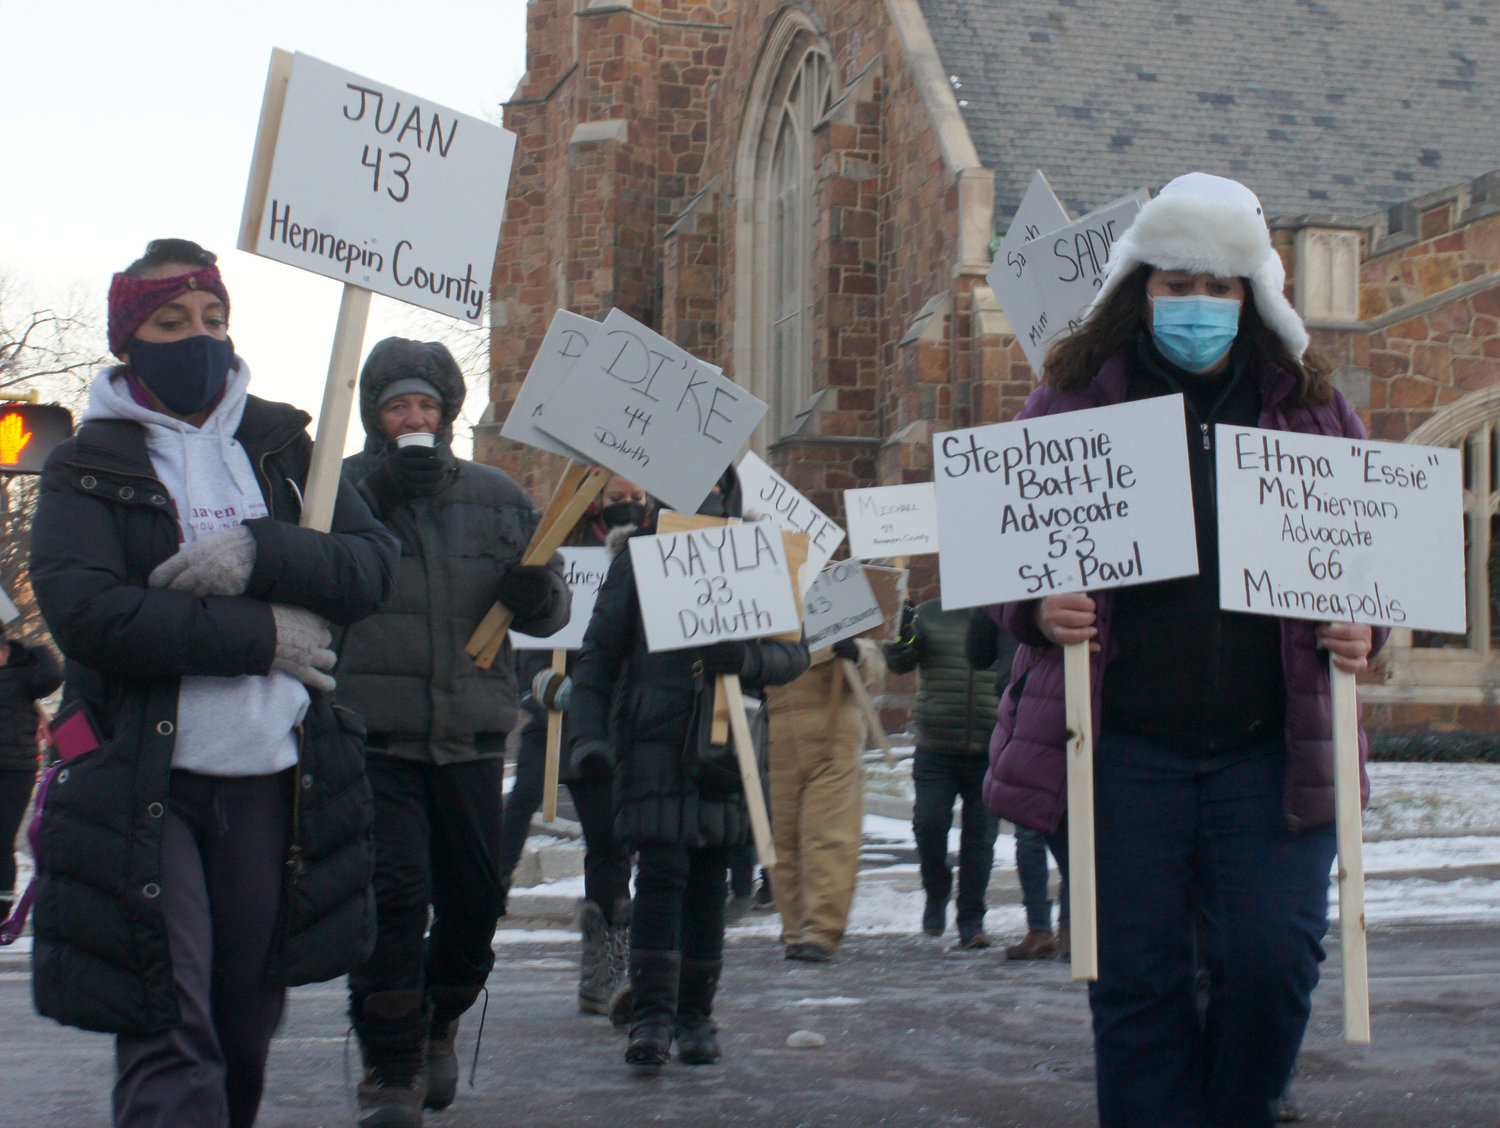 A memorial march for the homeless who have died took place Thursday, Dec. 16, 2021 at 4 p.m. Braving the cold, about 200 marchers bearing signs with the ages and names of the deceased started from Plymouth Congregational Church (19th and Nicollet Ave.) and looped north, returning to the church